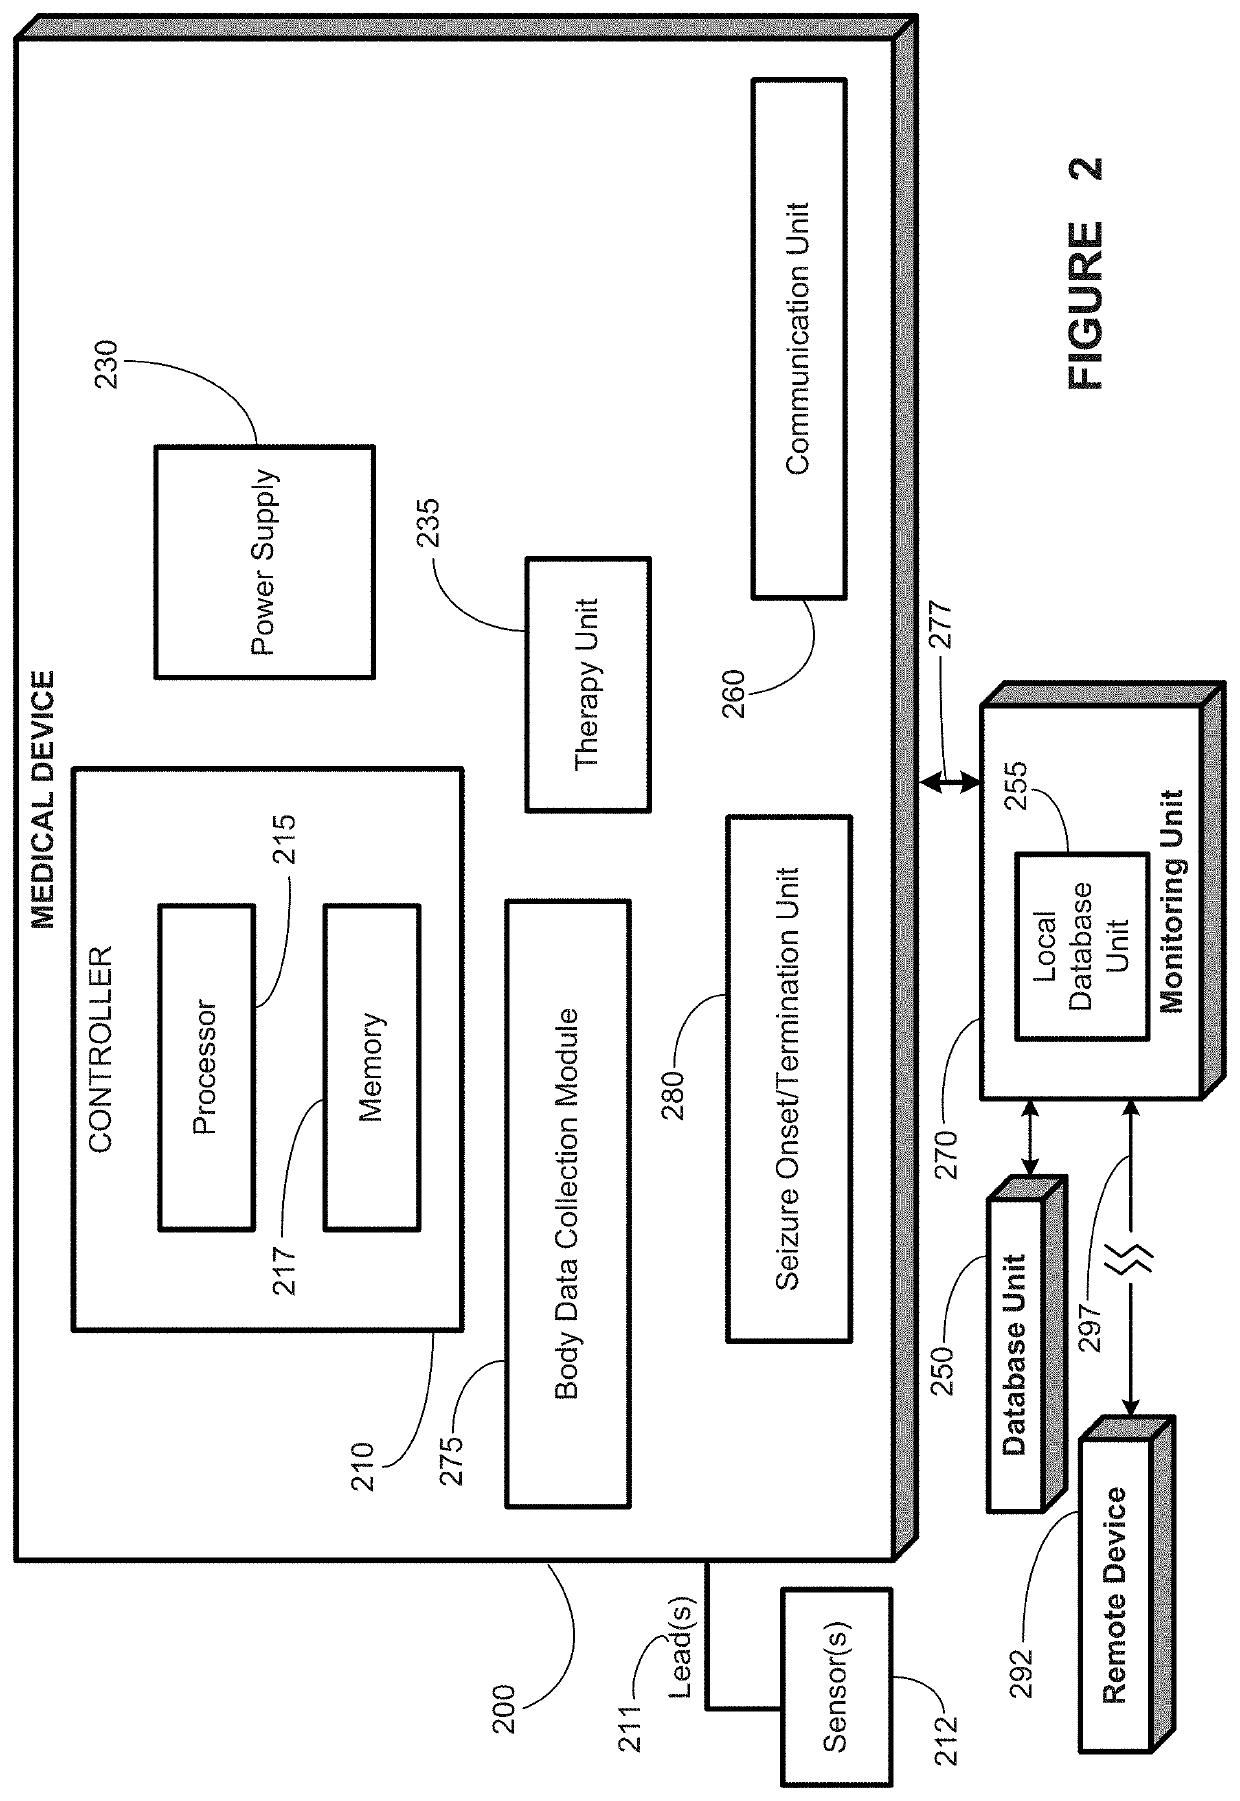 Apparatus and systems for event detection using probabilistic measures